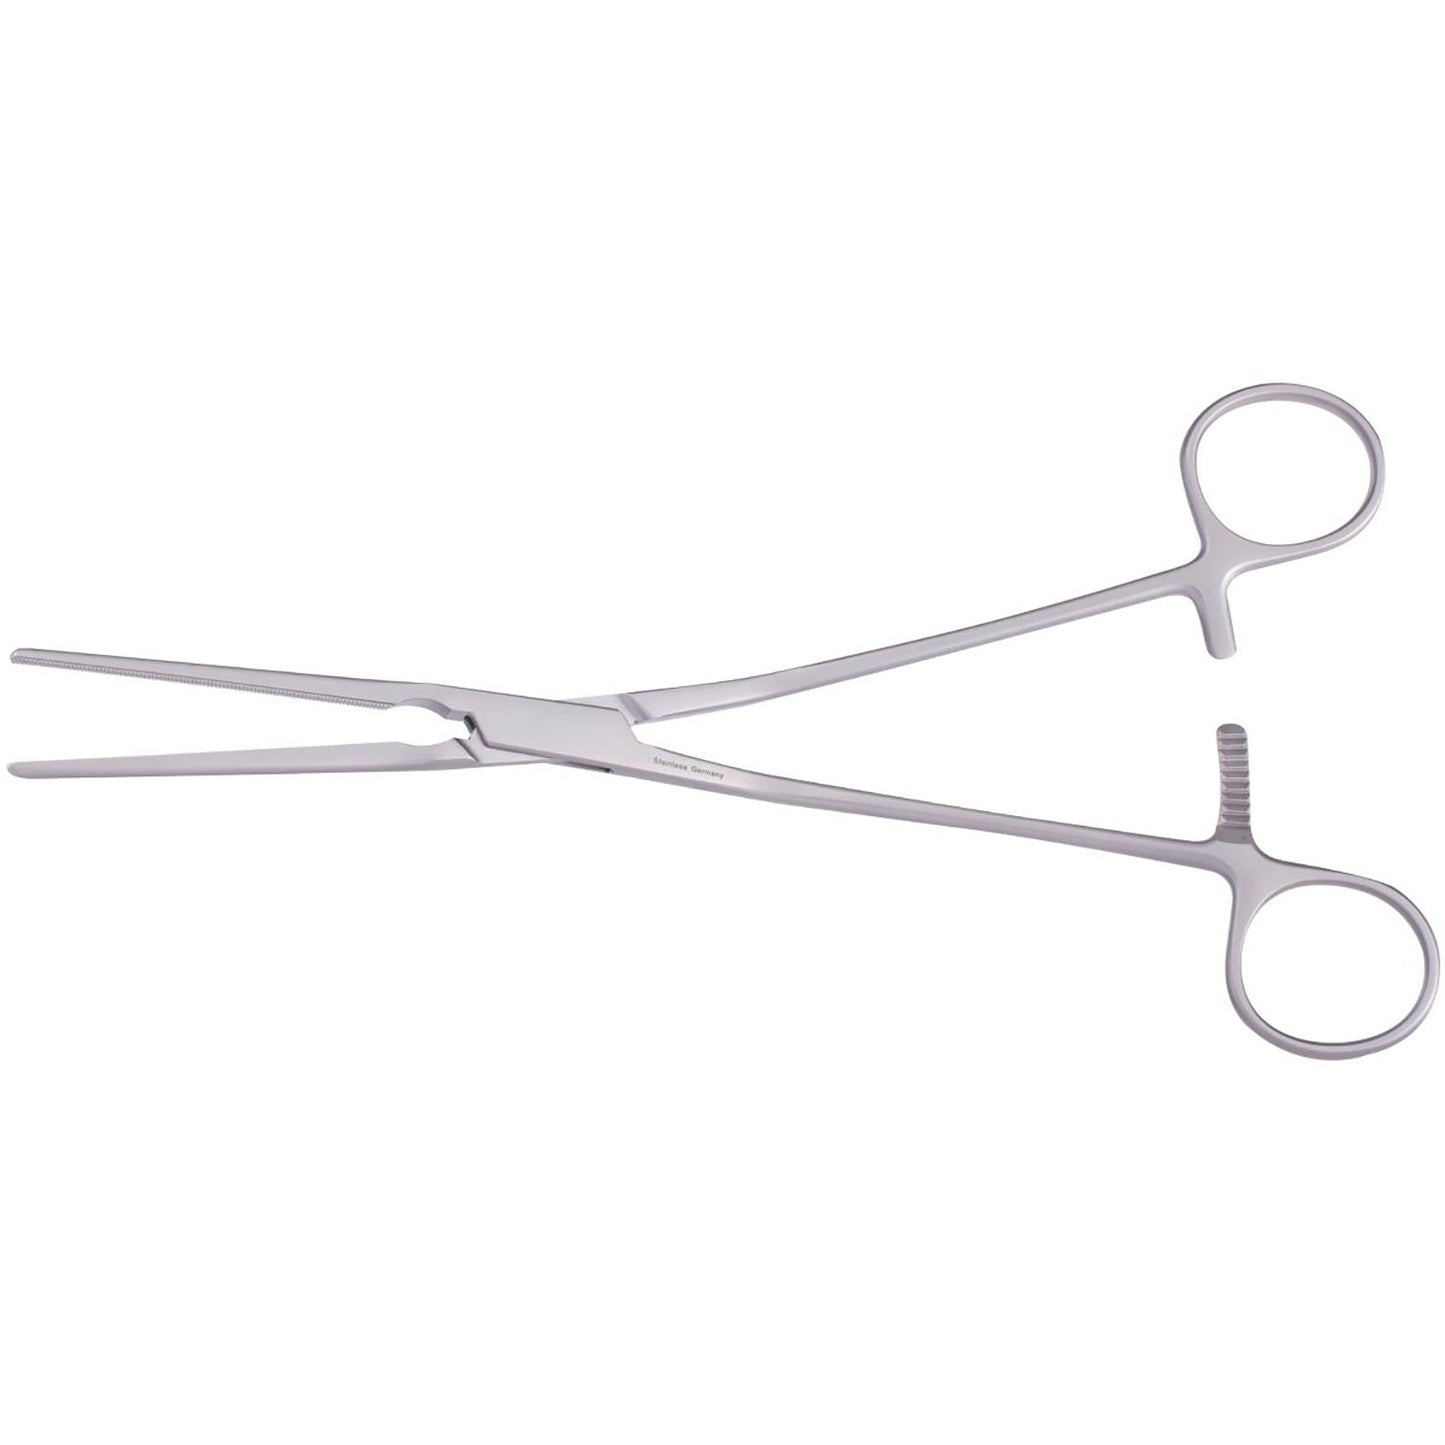 Debakey Coarctation and Peripheral Vascular Clamps